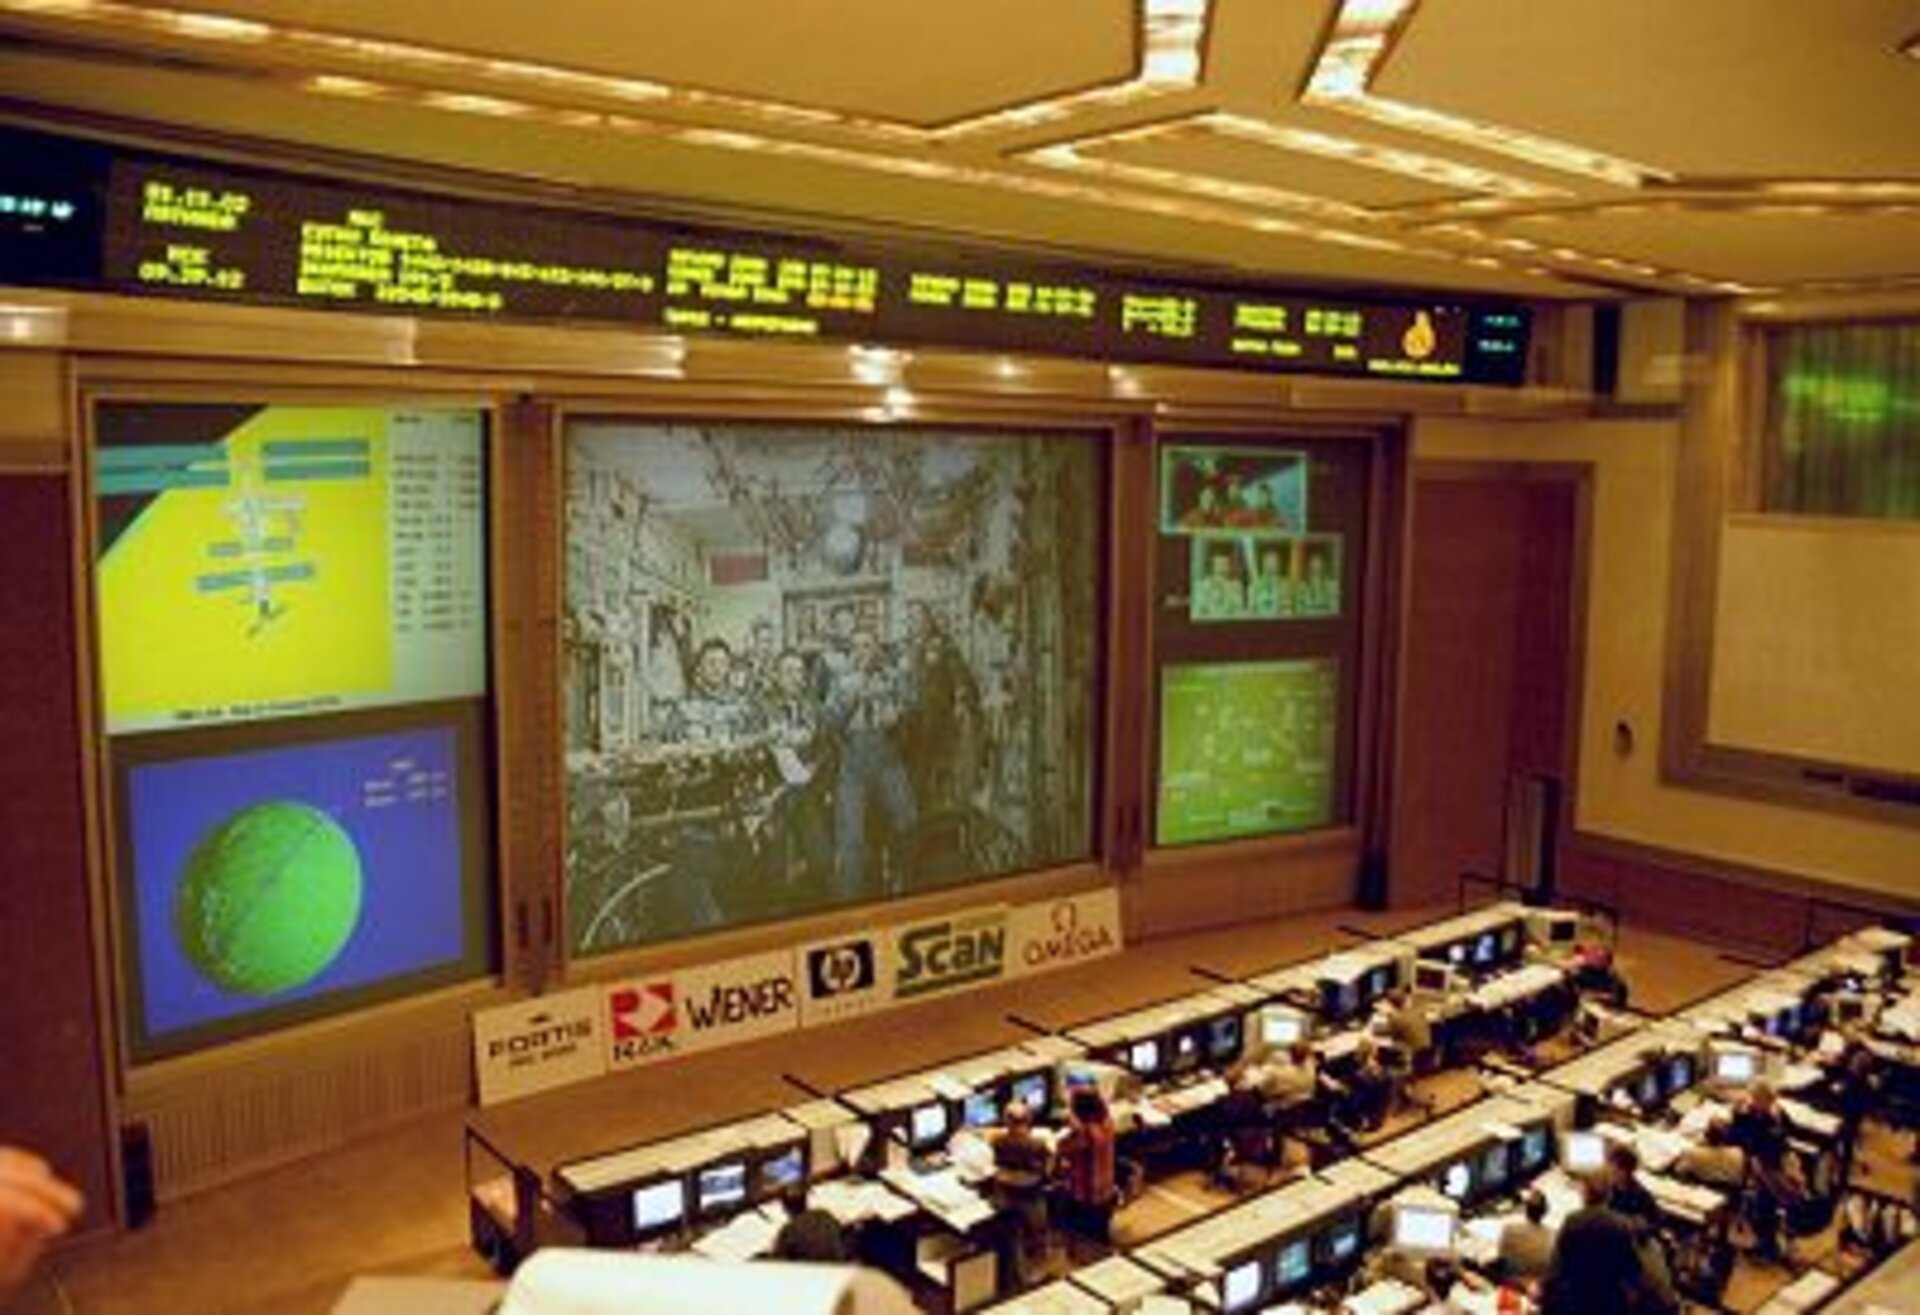 Main room at TsUP, the Russian mission control centre